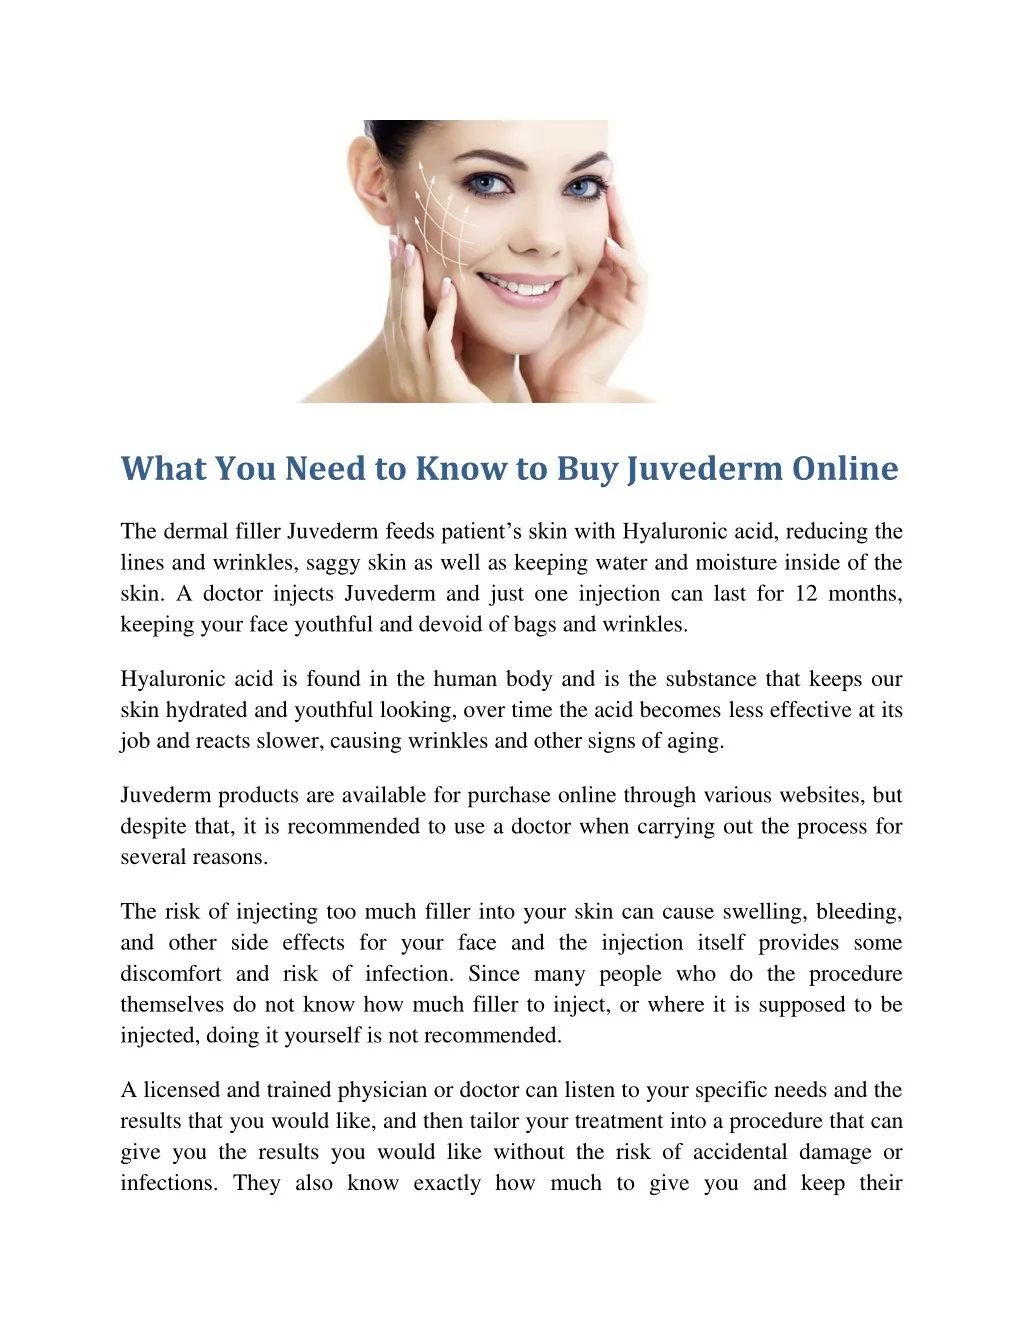 what you need to know to buy juvederm online